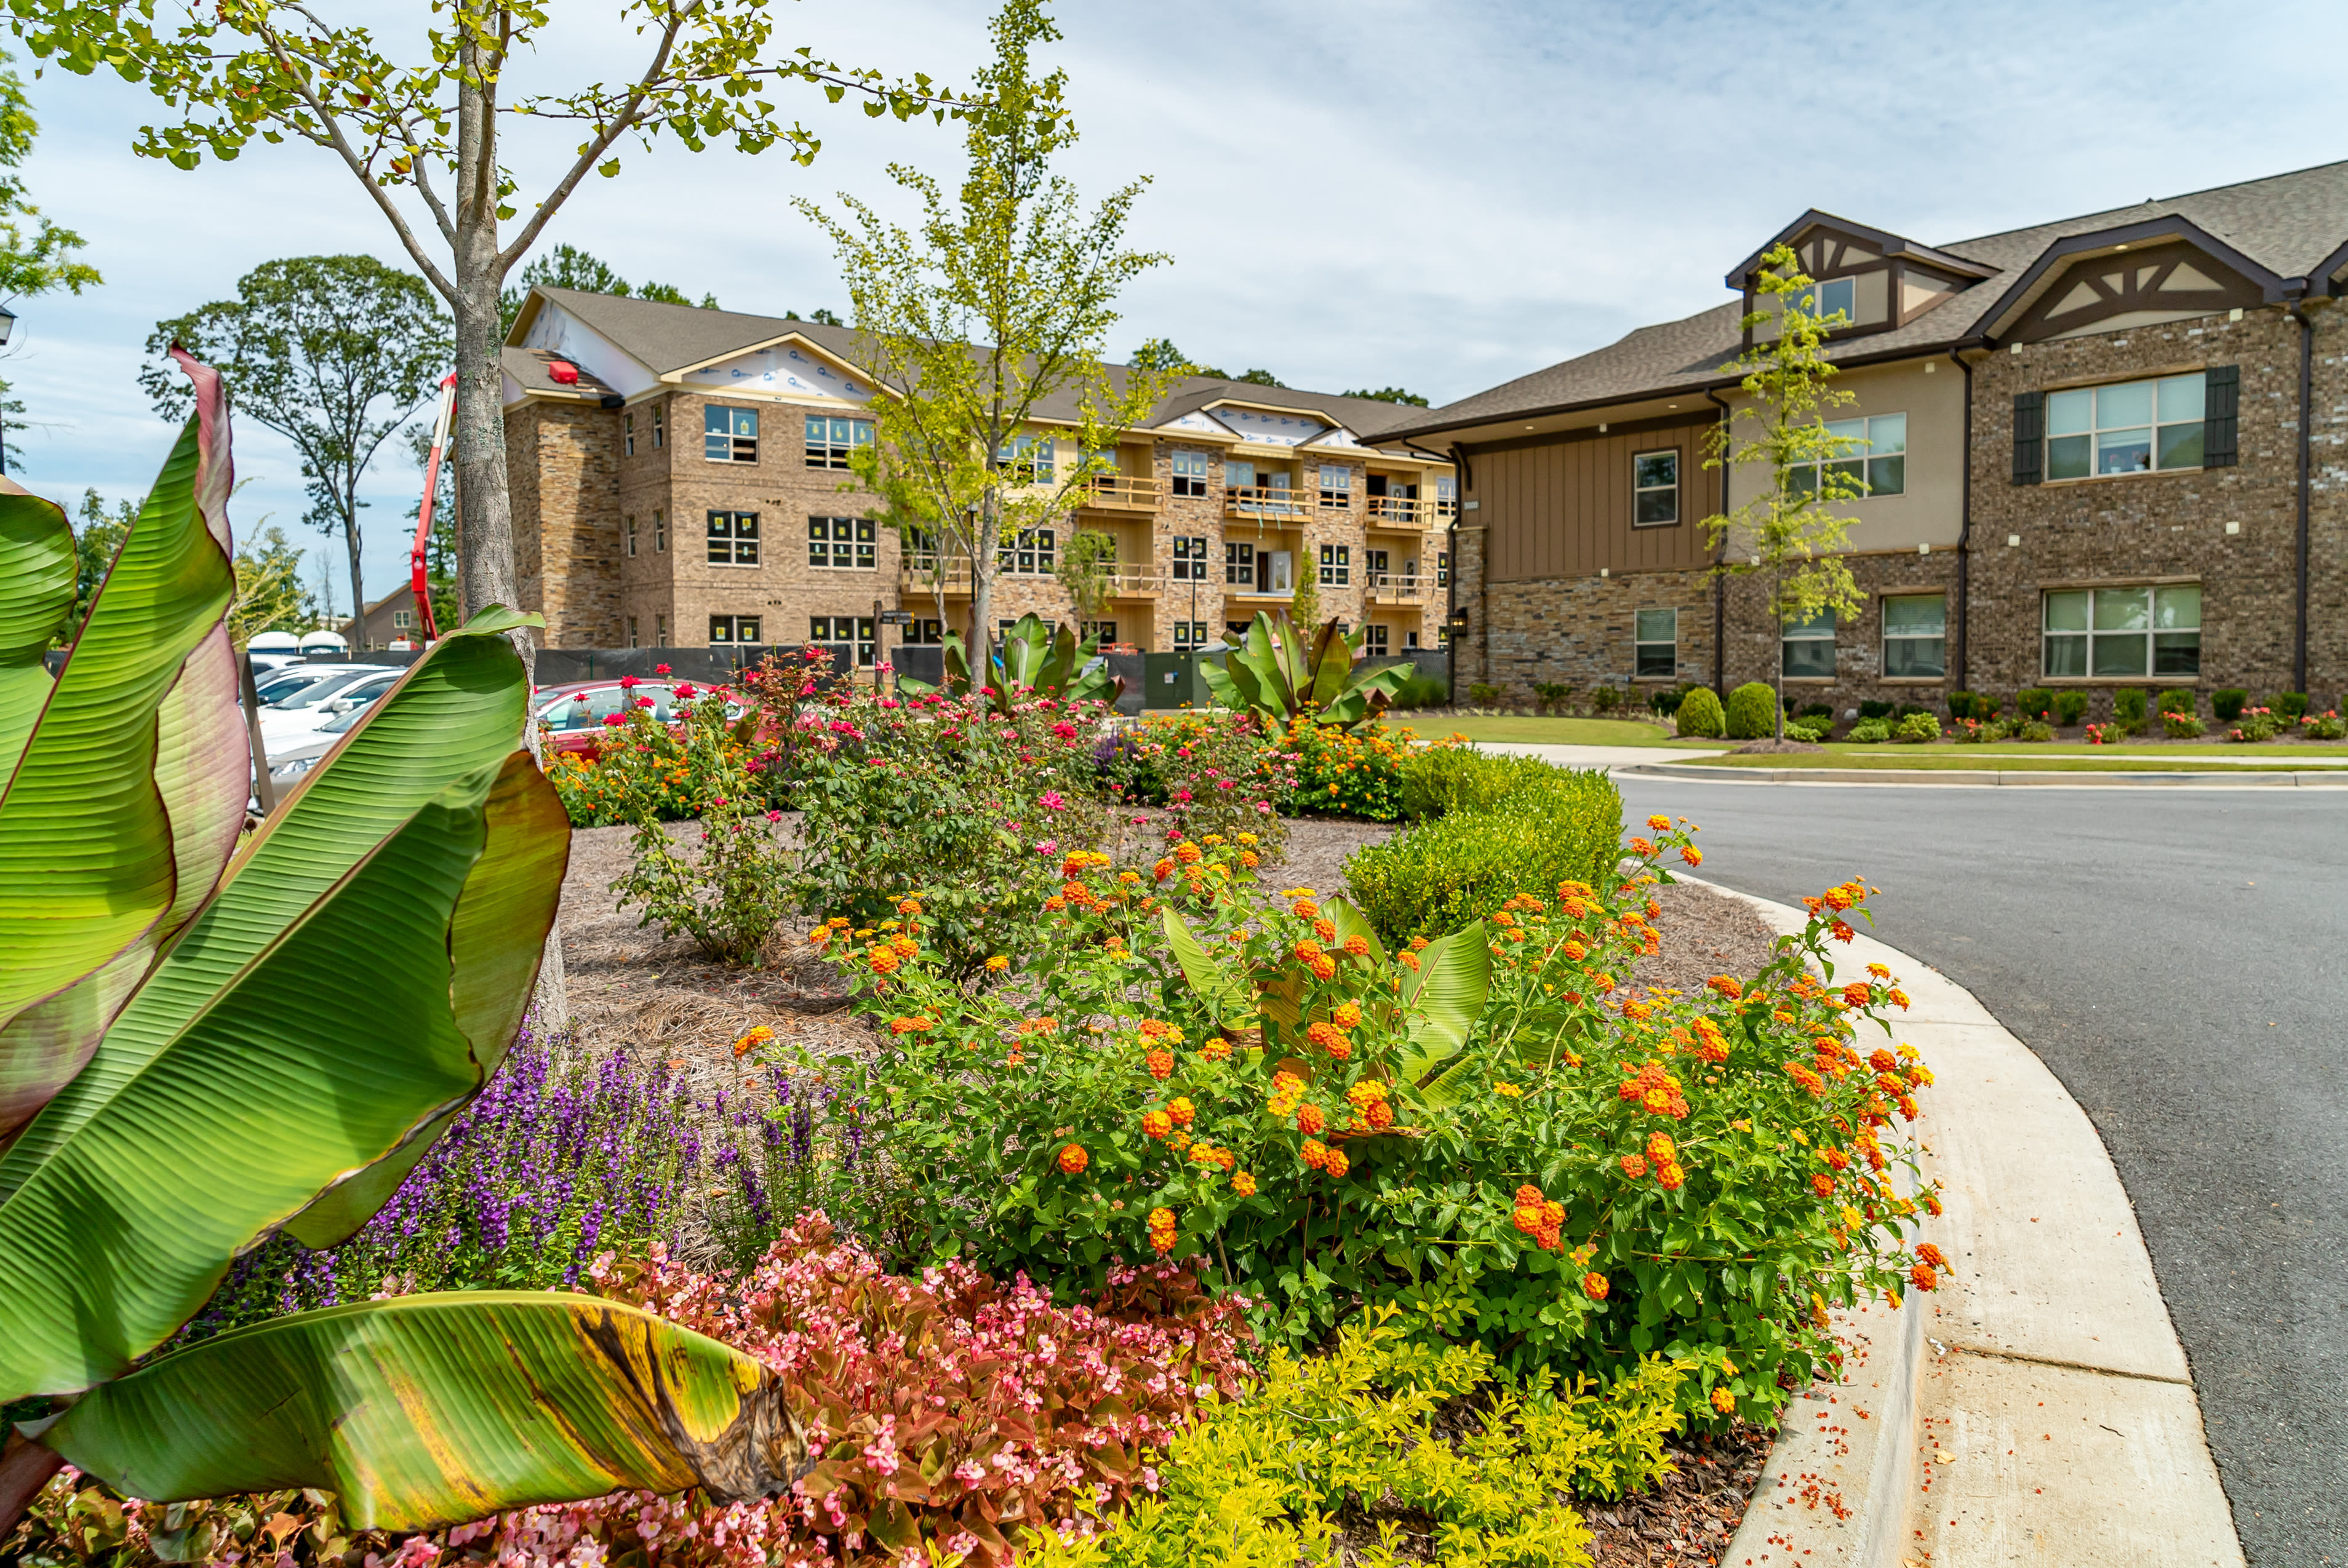 Senior Living apartments and shuttle at a AgeWell Living Georgia community